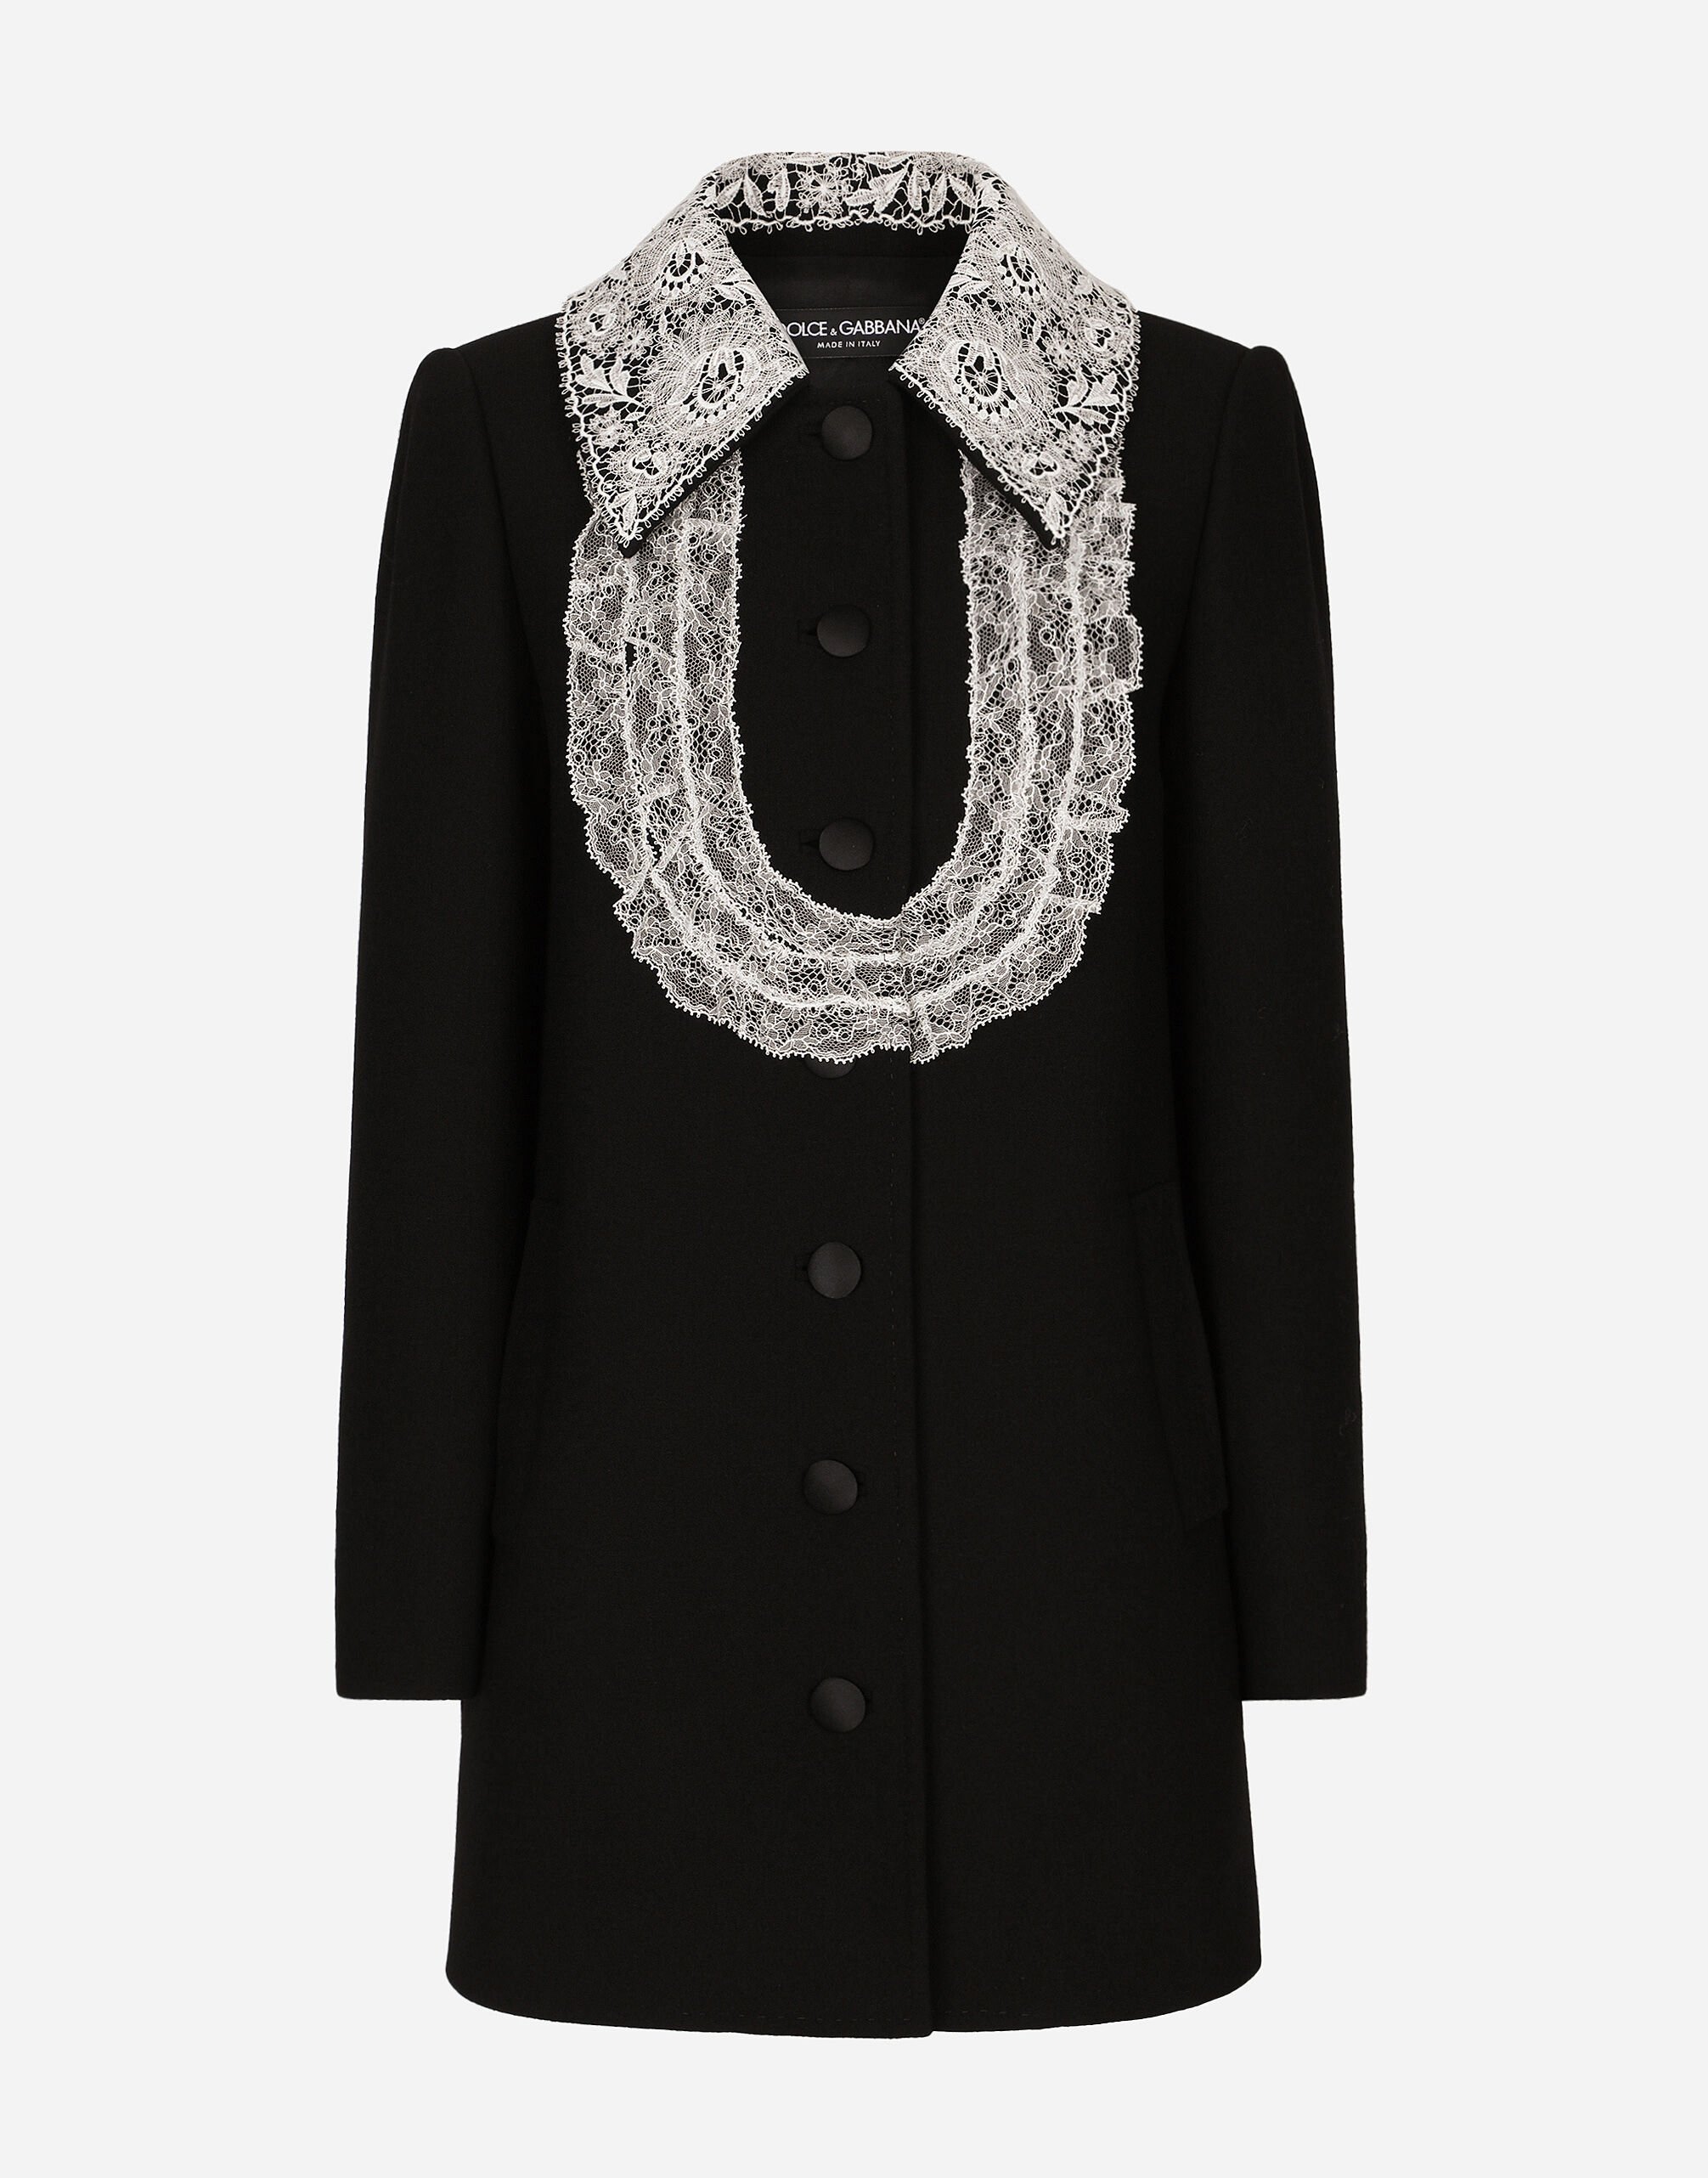 Dolce & Gabbana Short wool coat with lace details Print F0E1YTIS1VH